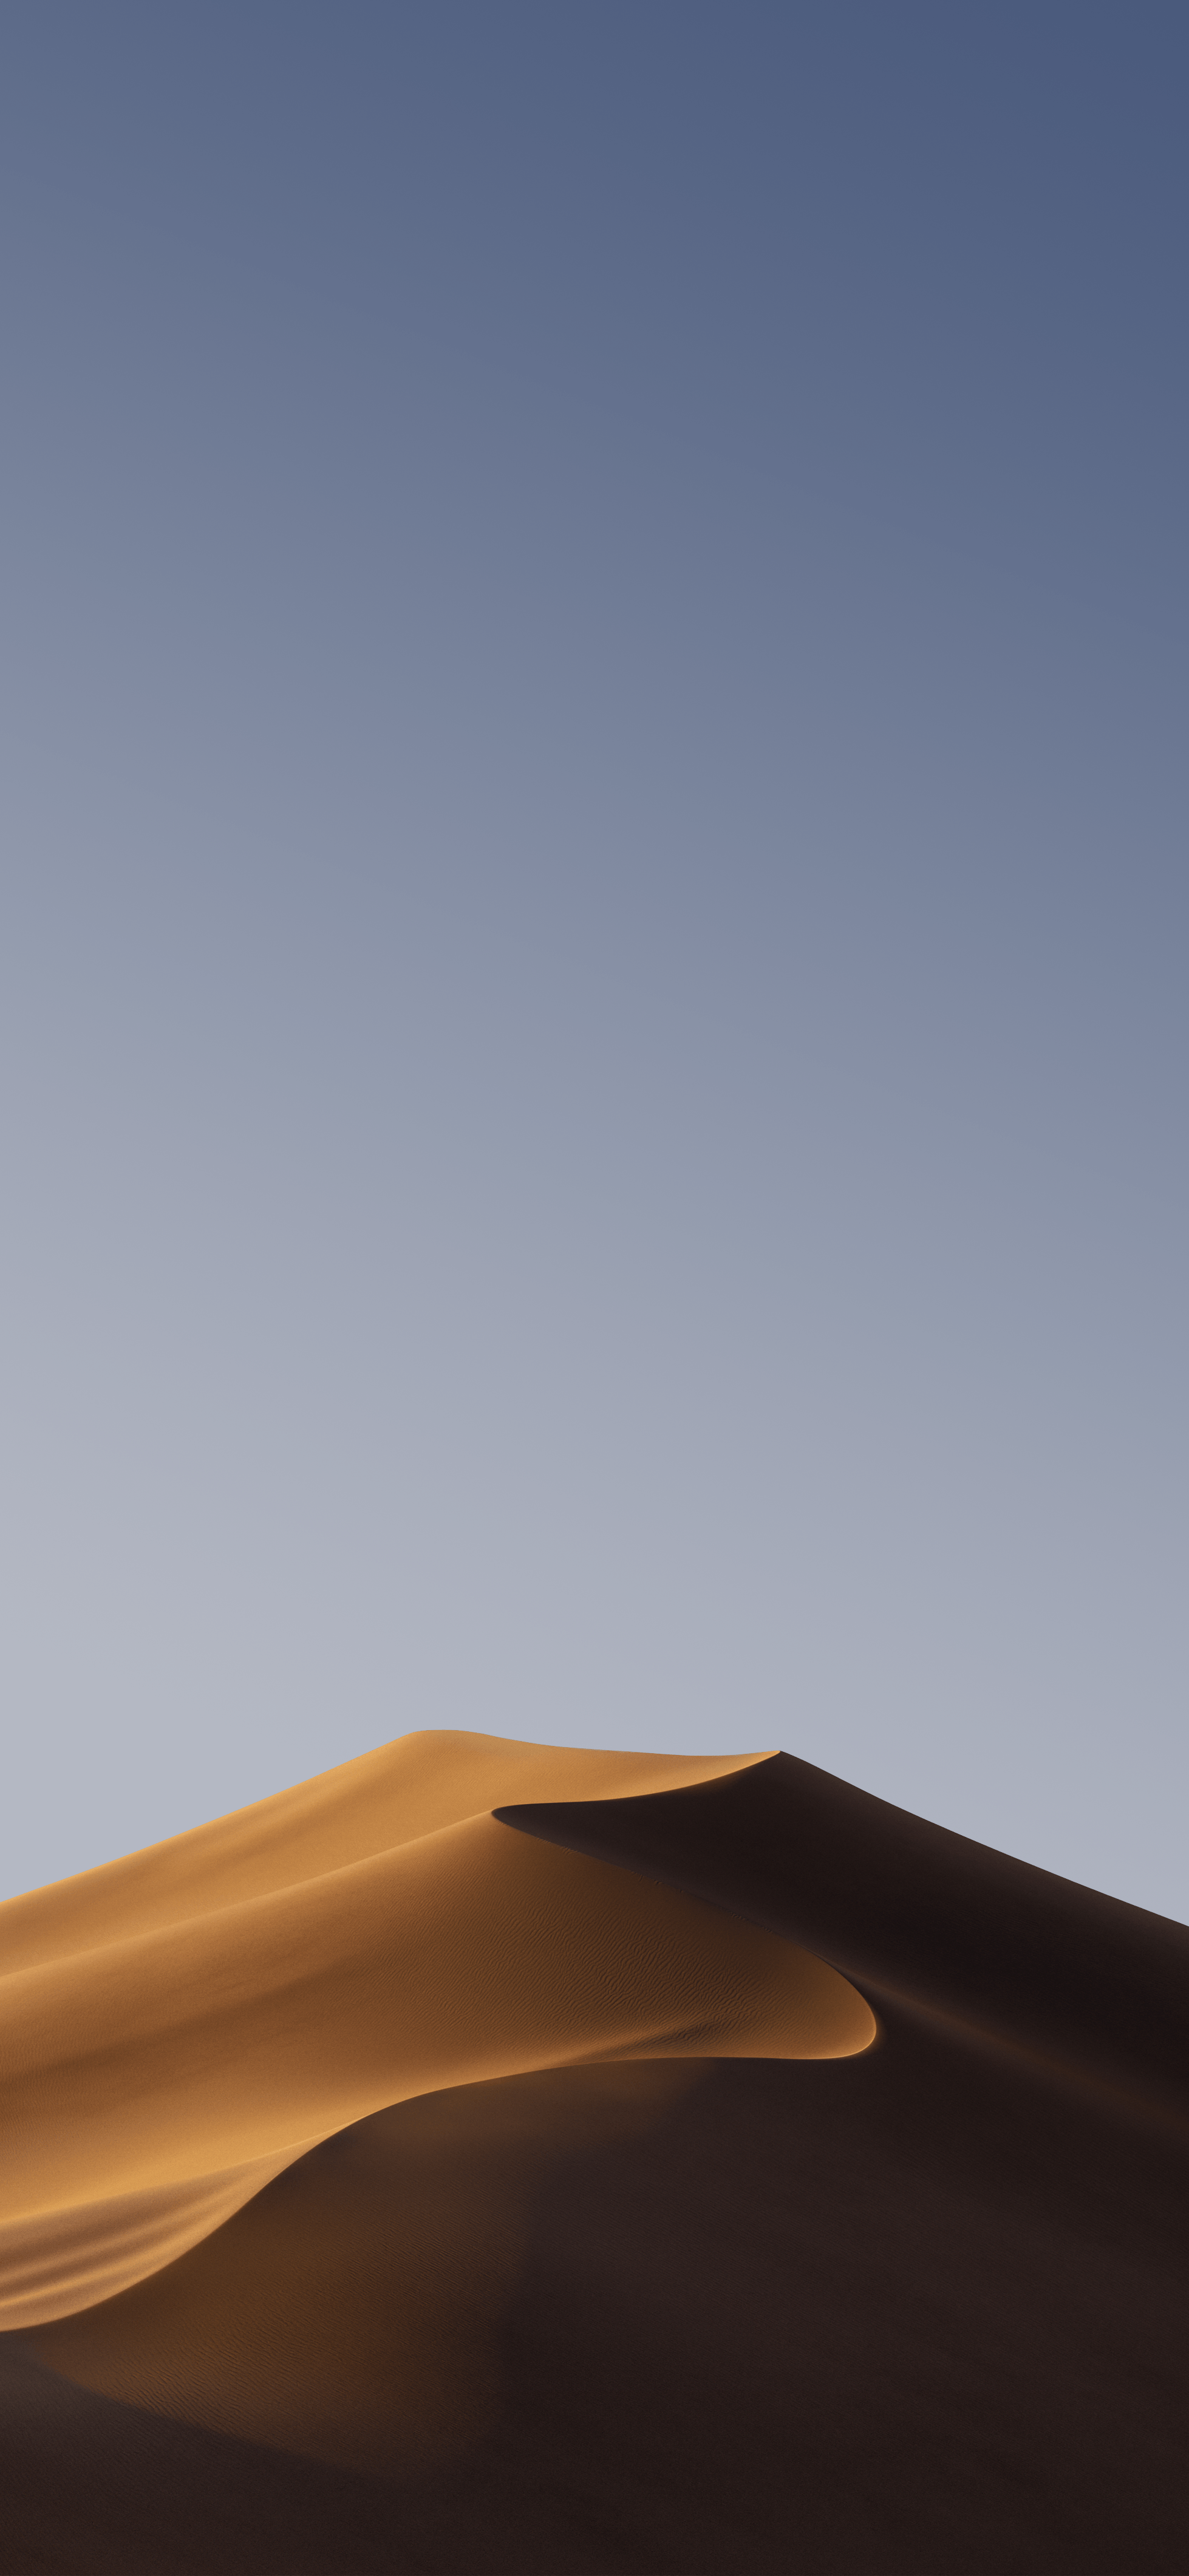 macOS Mojave for iPhone. iPhone wallpaper, Galaxy wallpaper